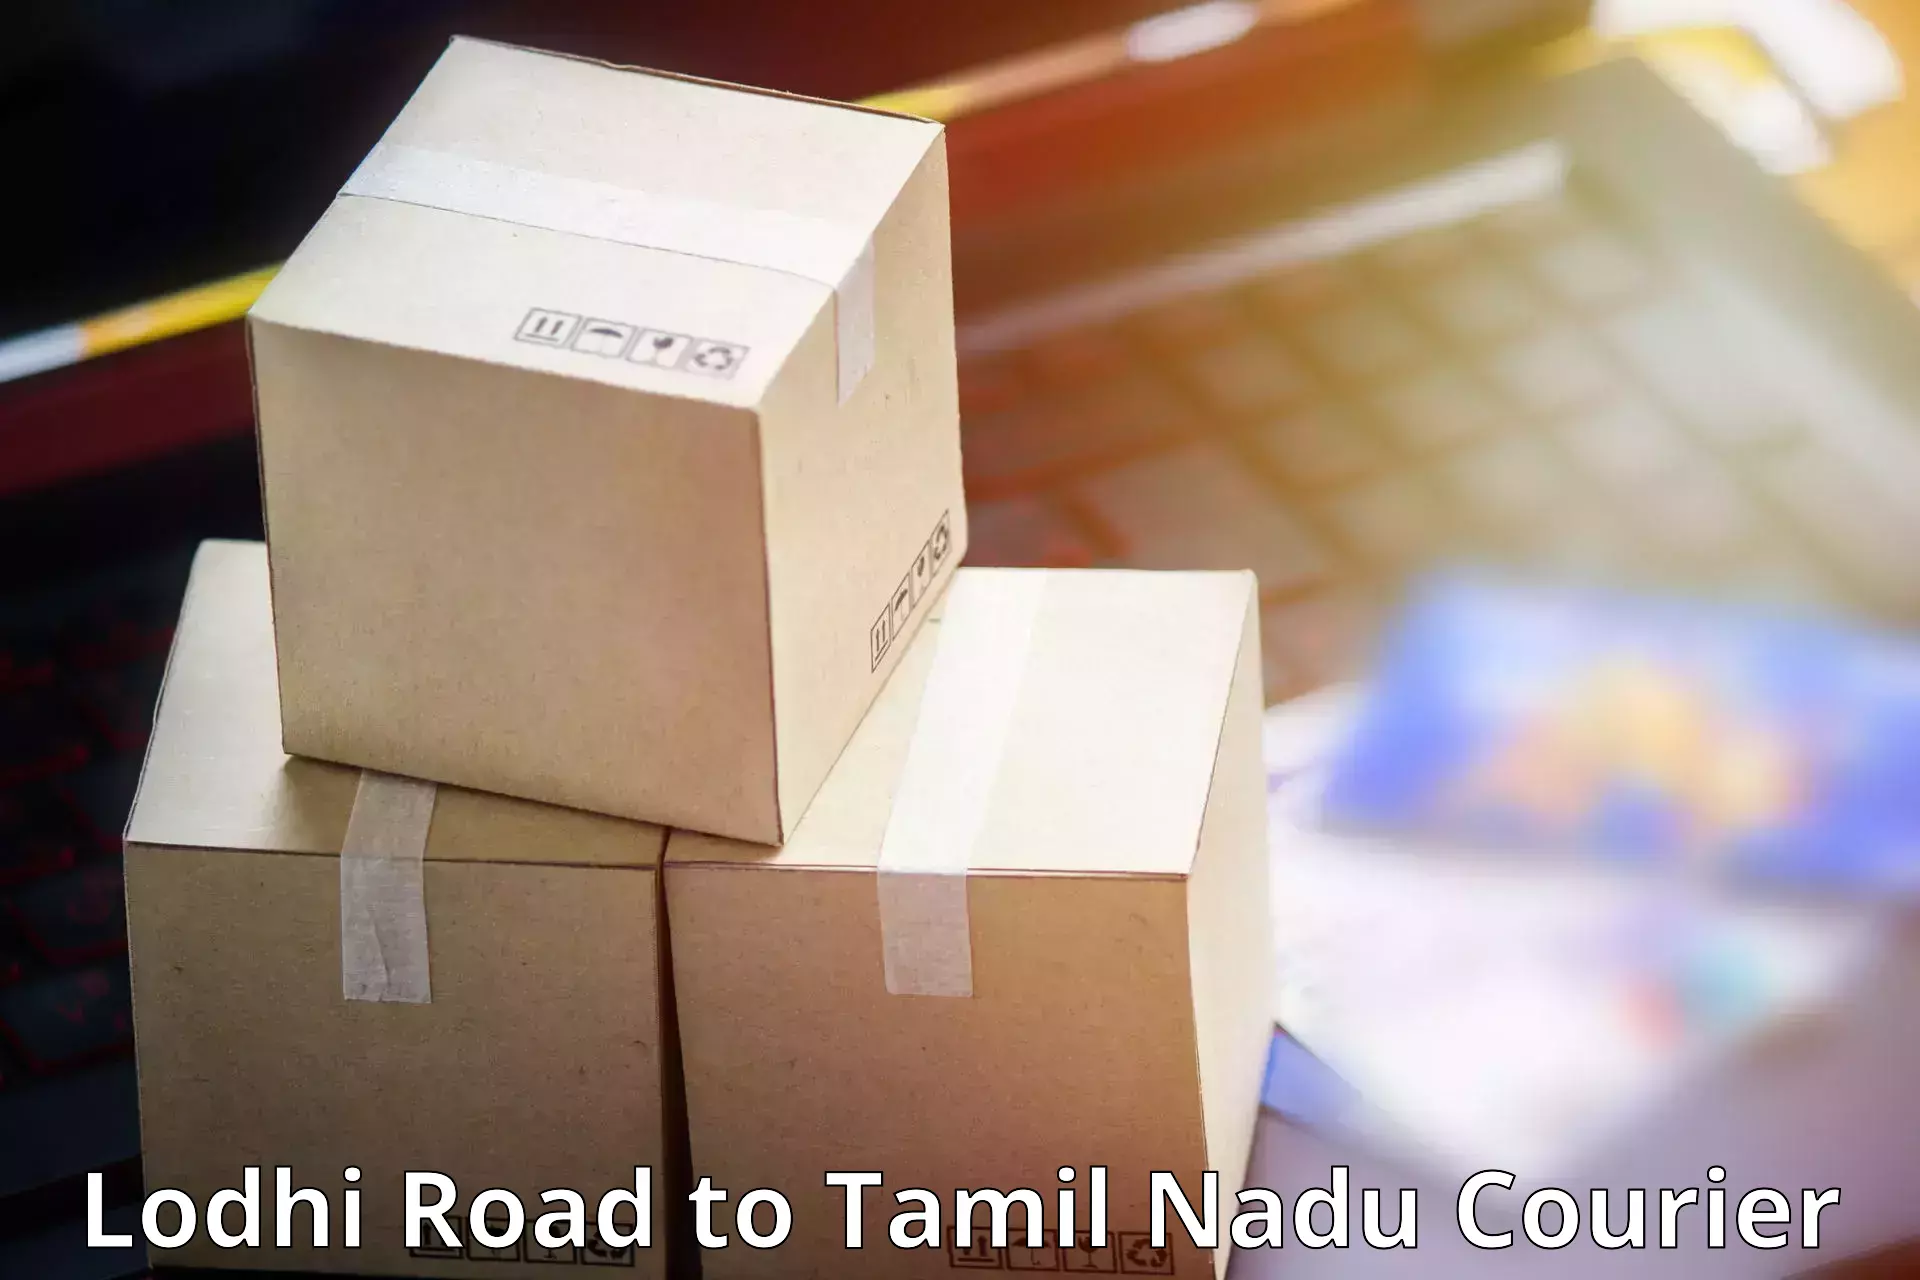 Efficient parcel service Lodhi Road to Shanmugha Arts Science Technology and Research Academy Thanjavur